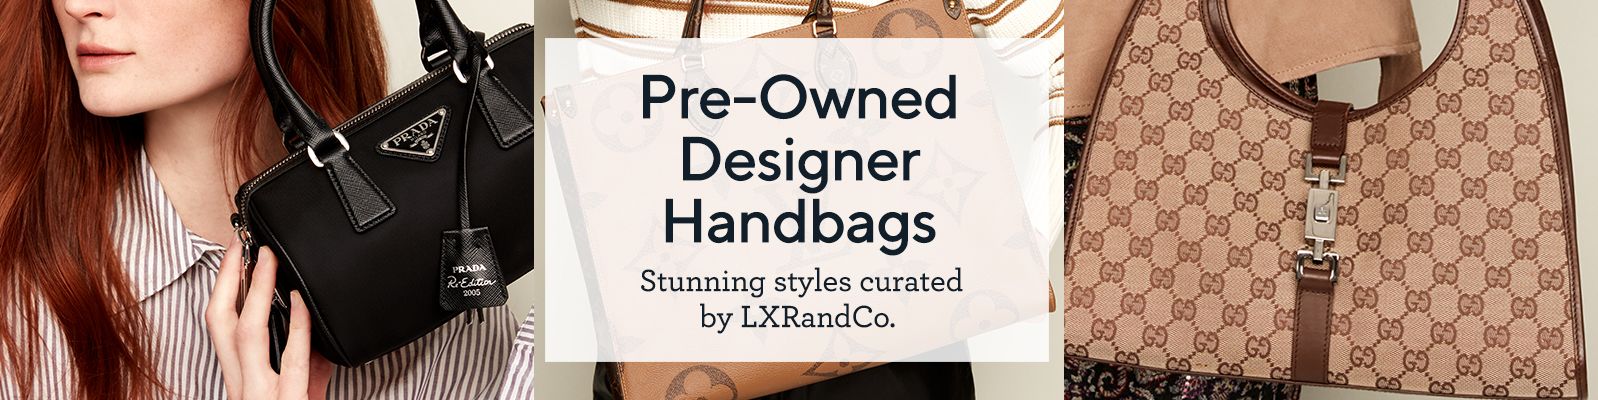 Pre-Owned Designer Handbags. Stunning styles curated by LXRandCo.